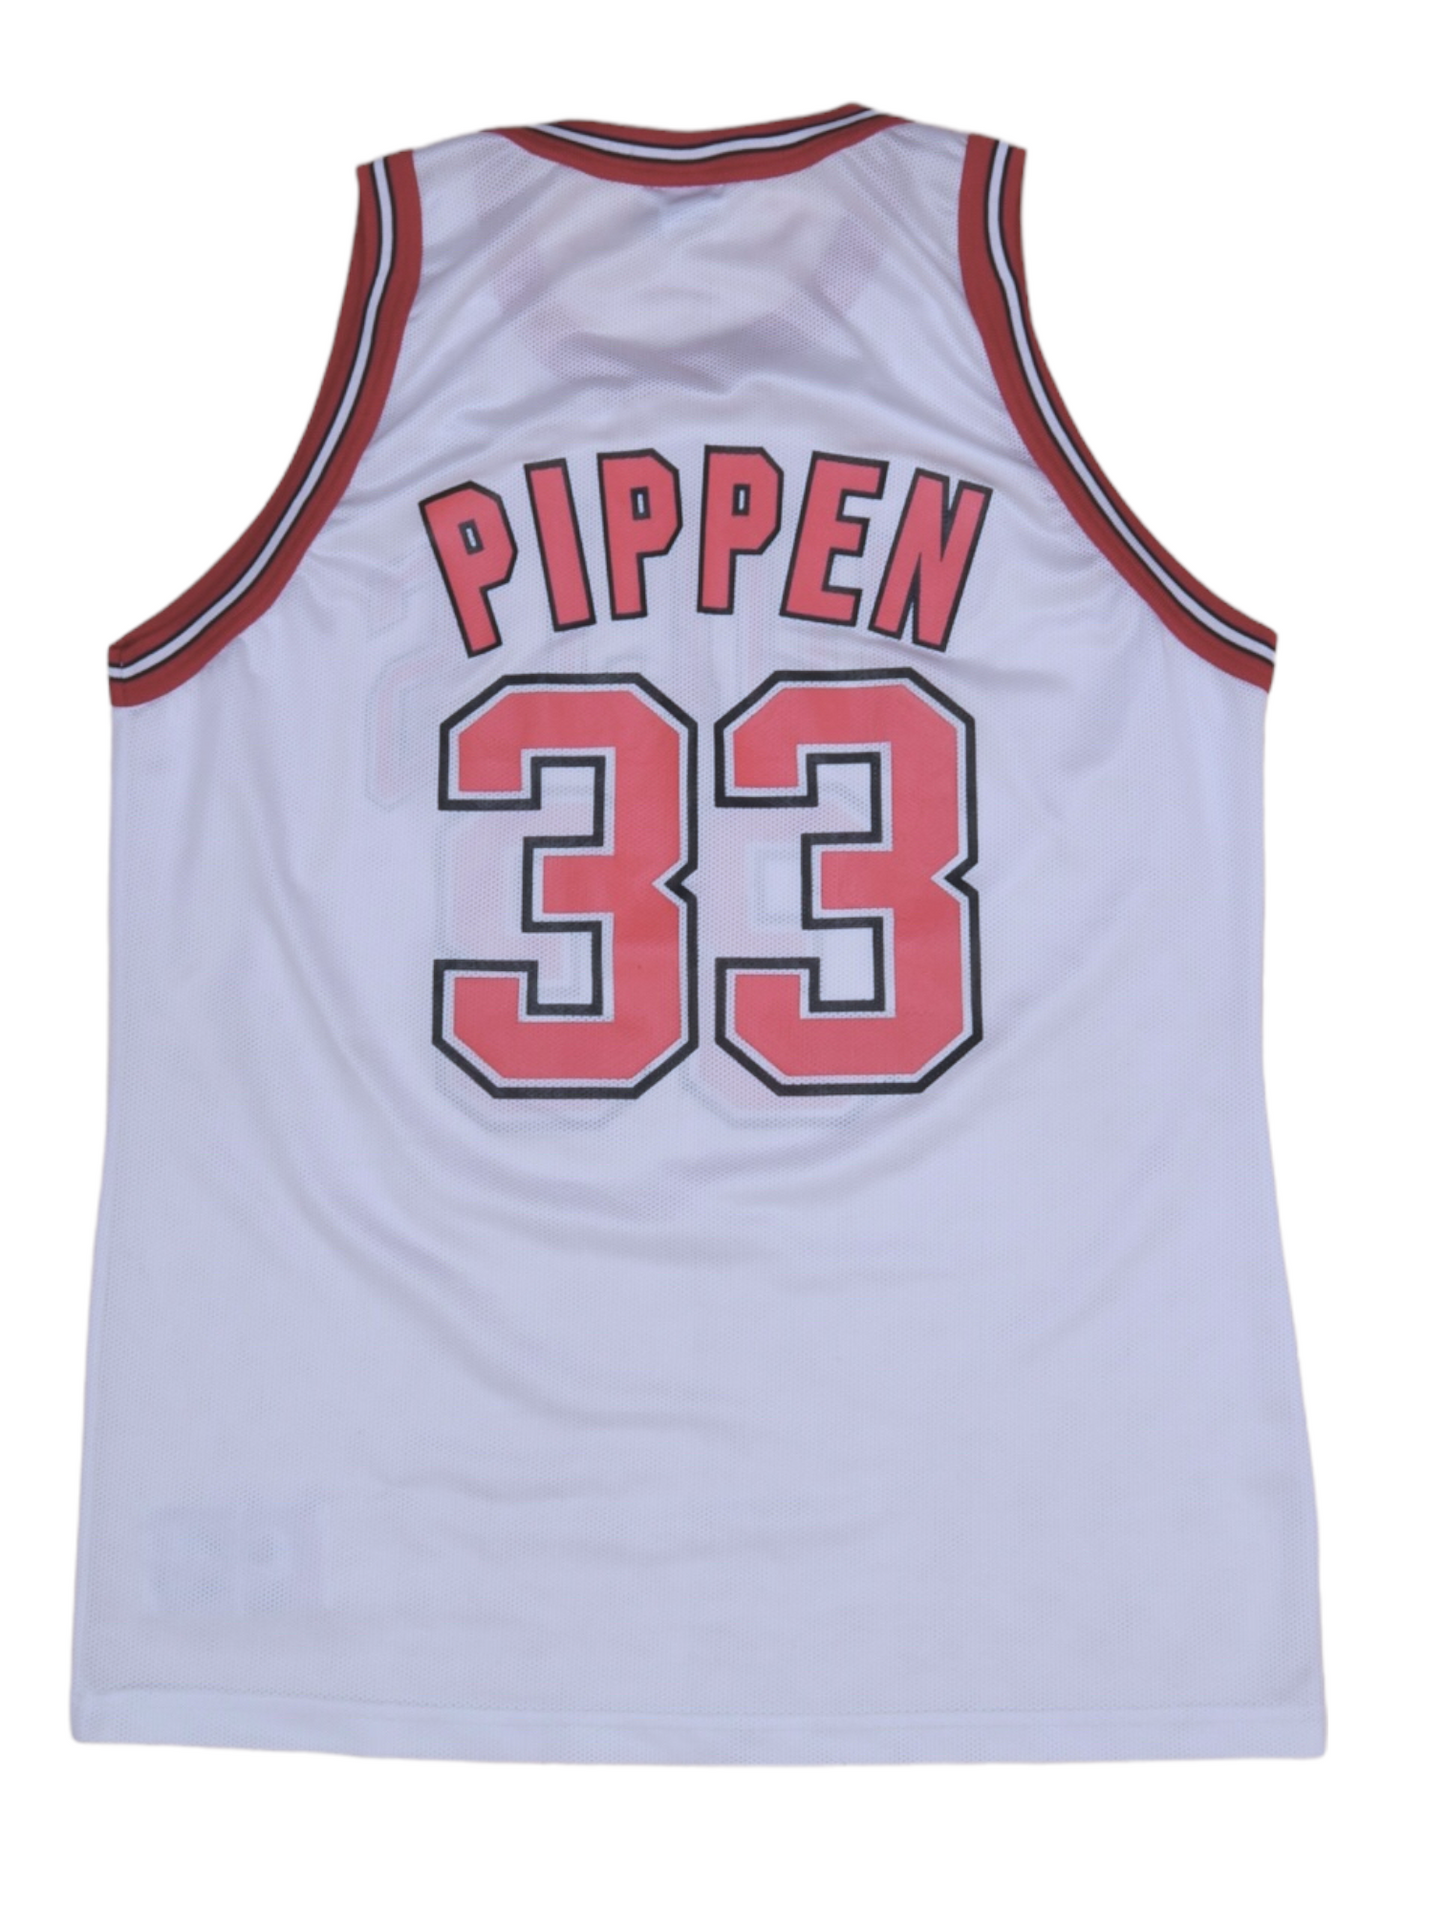 Scottie Pippen Chicago Bulls 1995 - 1998 Champion Basketball Home Jersey NBA White Size 44 Large